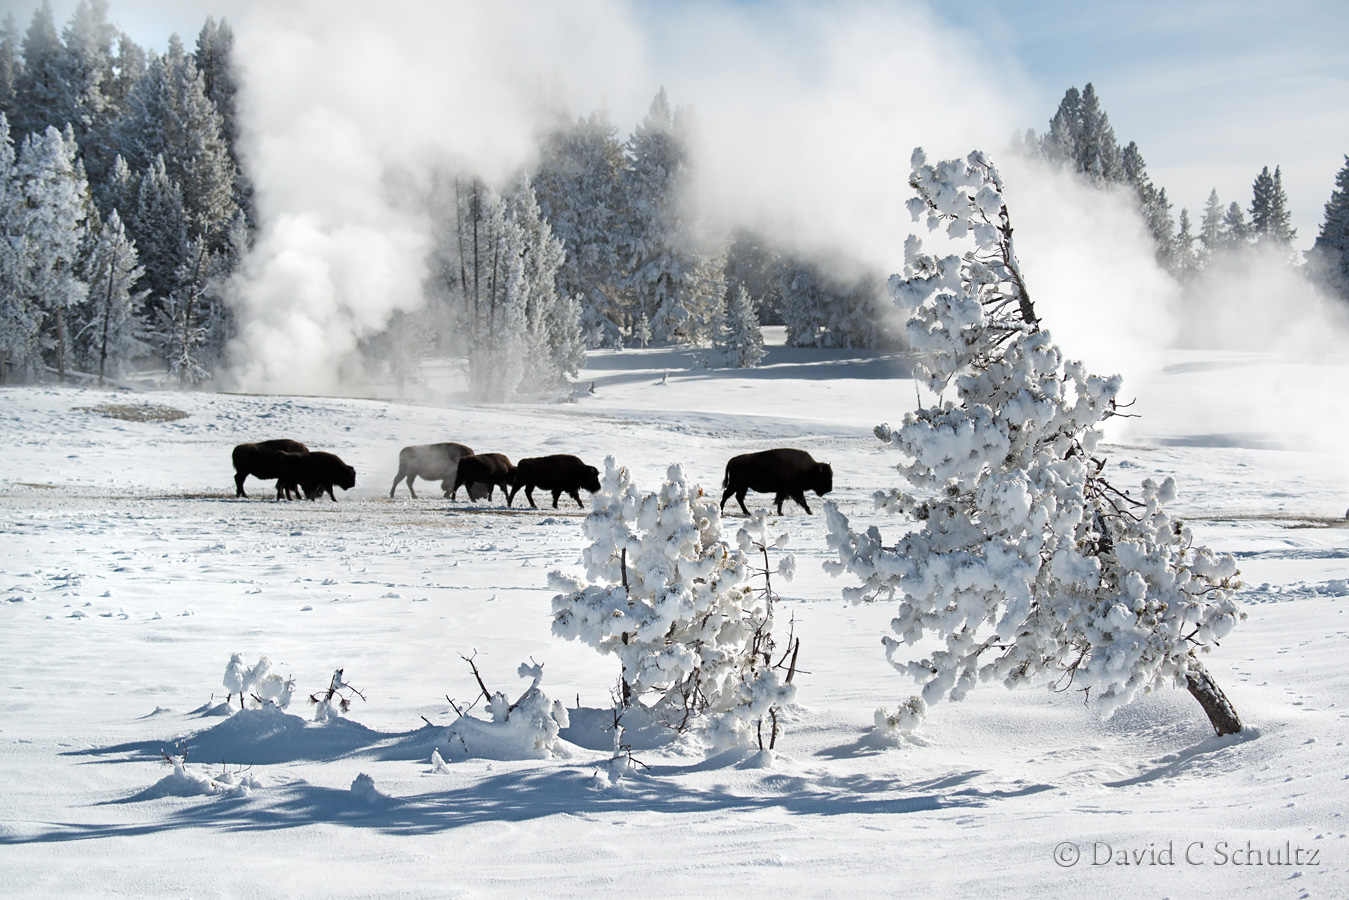 Bison and geysers in Yellowstone - Image #161-2201